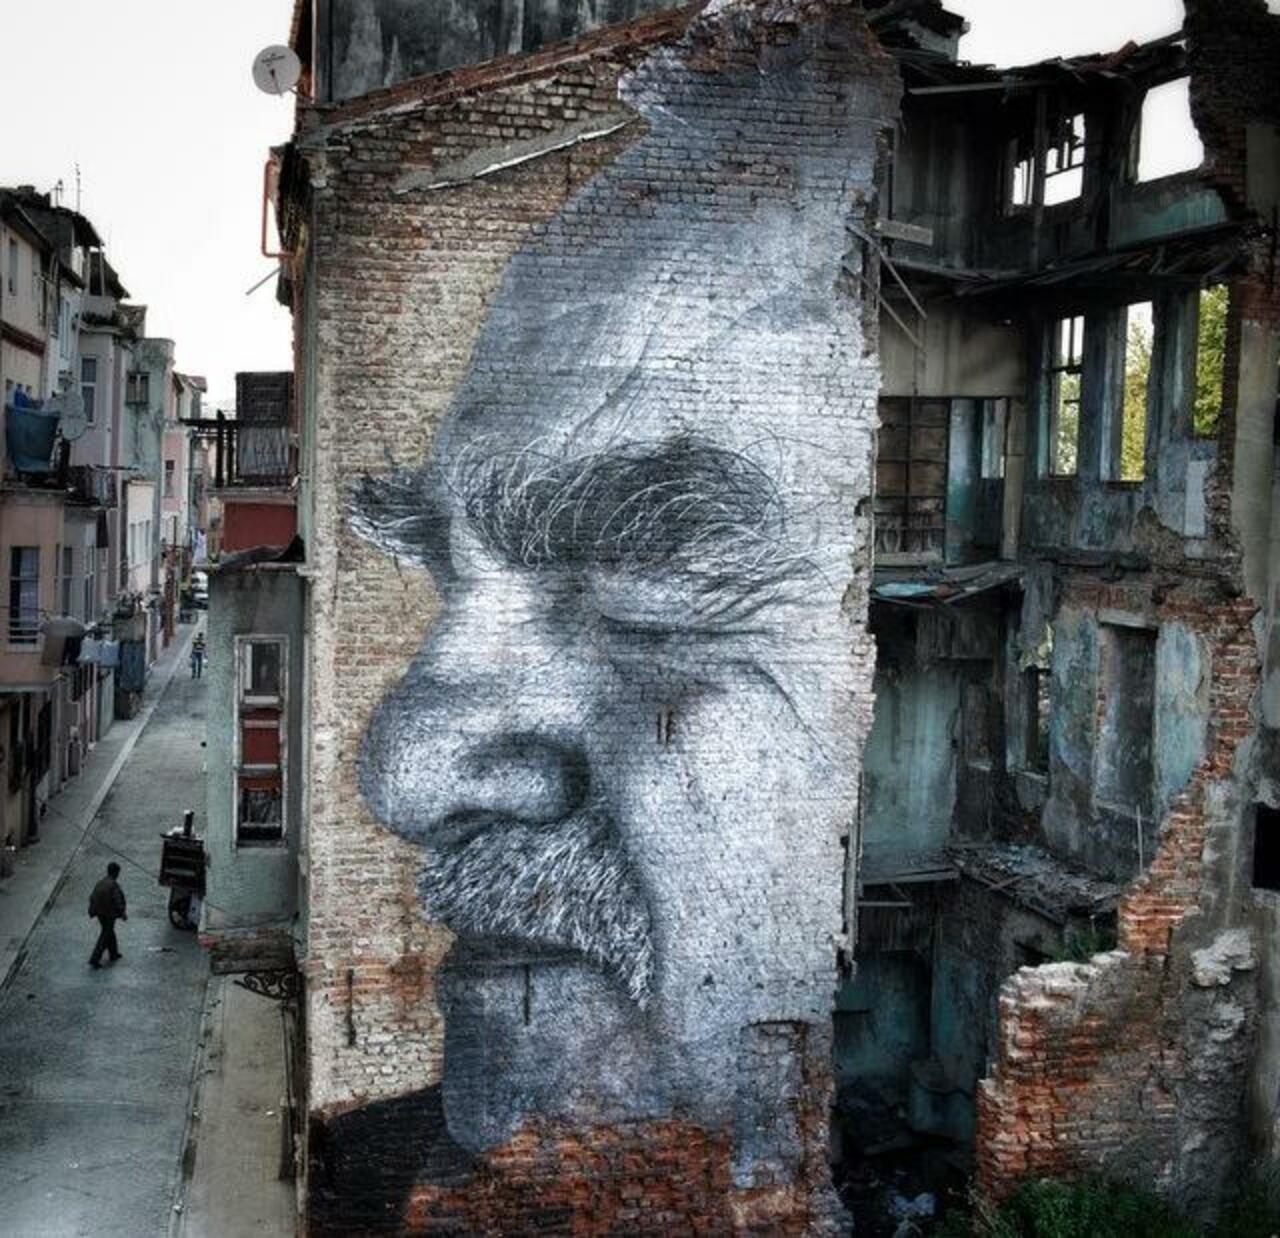 Street Art by JR in Istanbul & after local police painted over it 

#art #arte #graffiti #streetart http://t.co/sHzz0y0QIJ